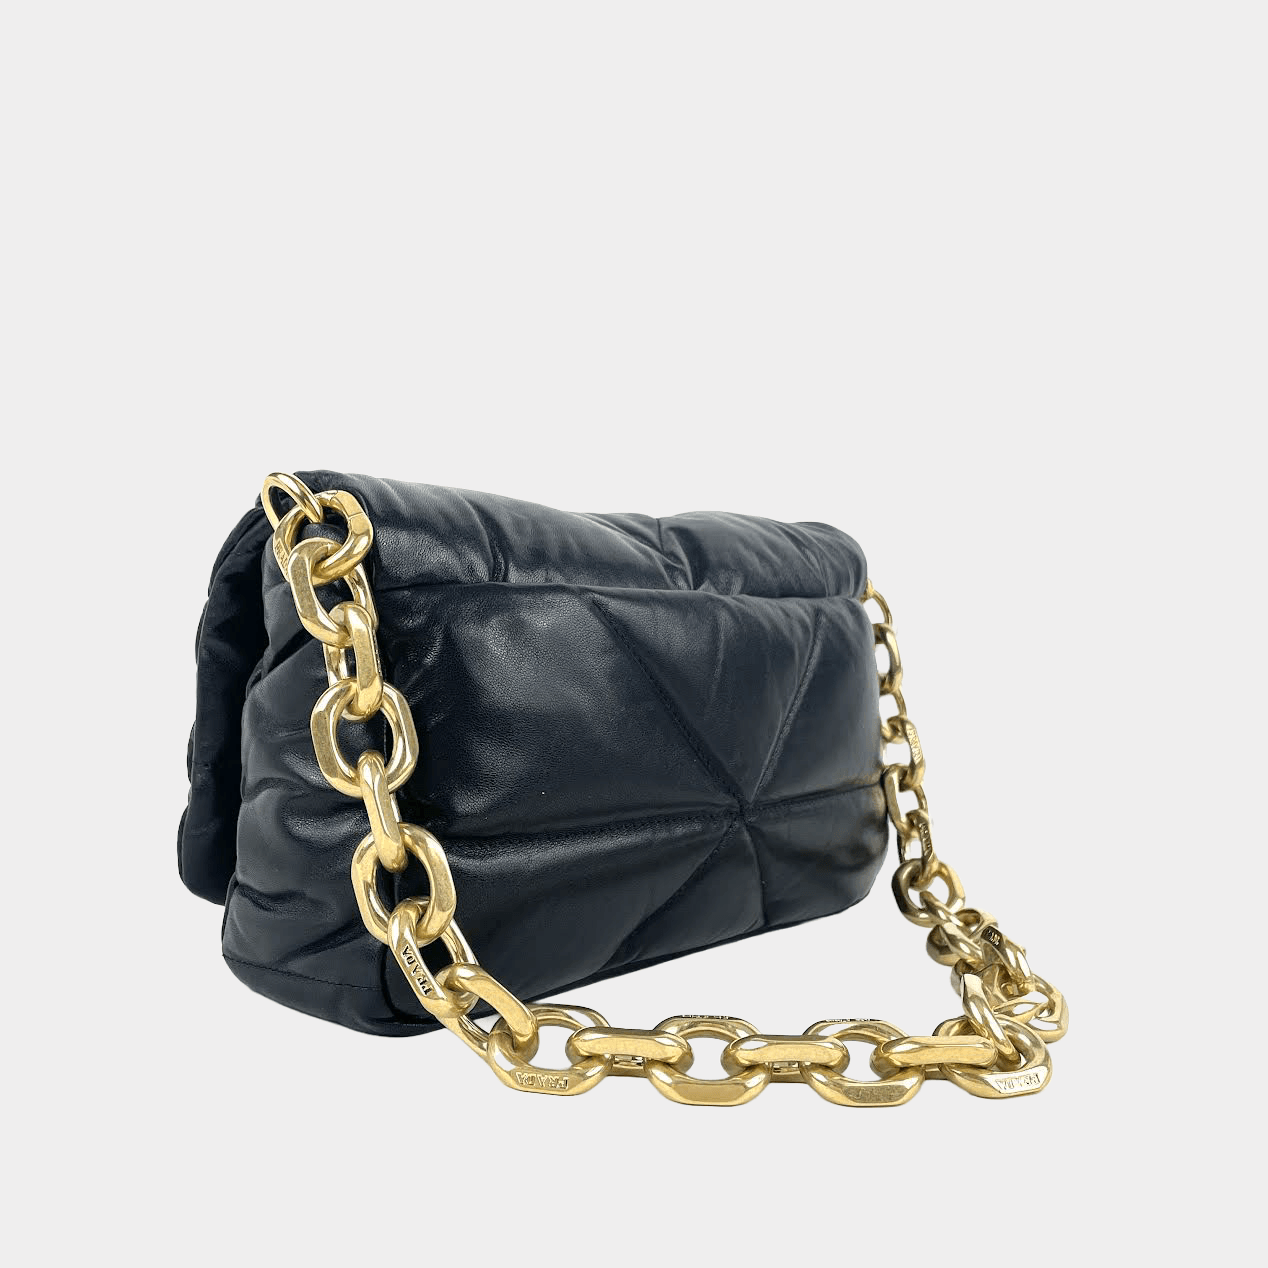 Sold at Auction: Chanel Jumbo Chesterfield Puffer Leather Flap Bag